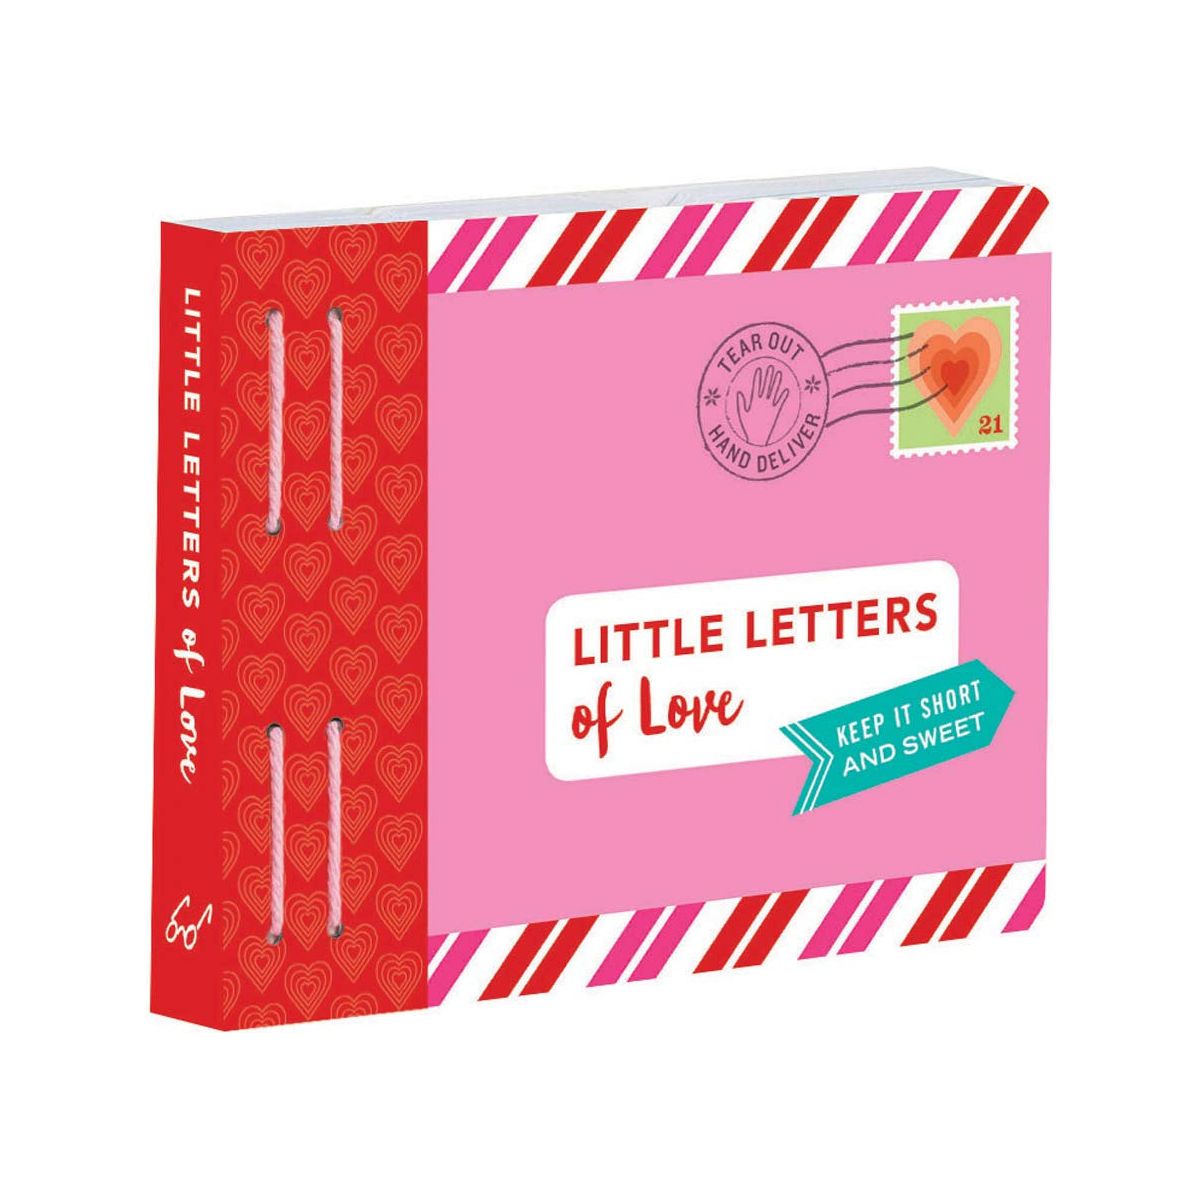 Little Letters of Love